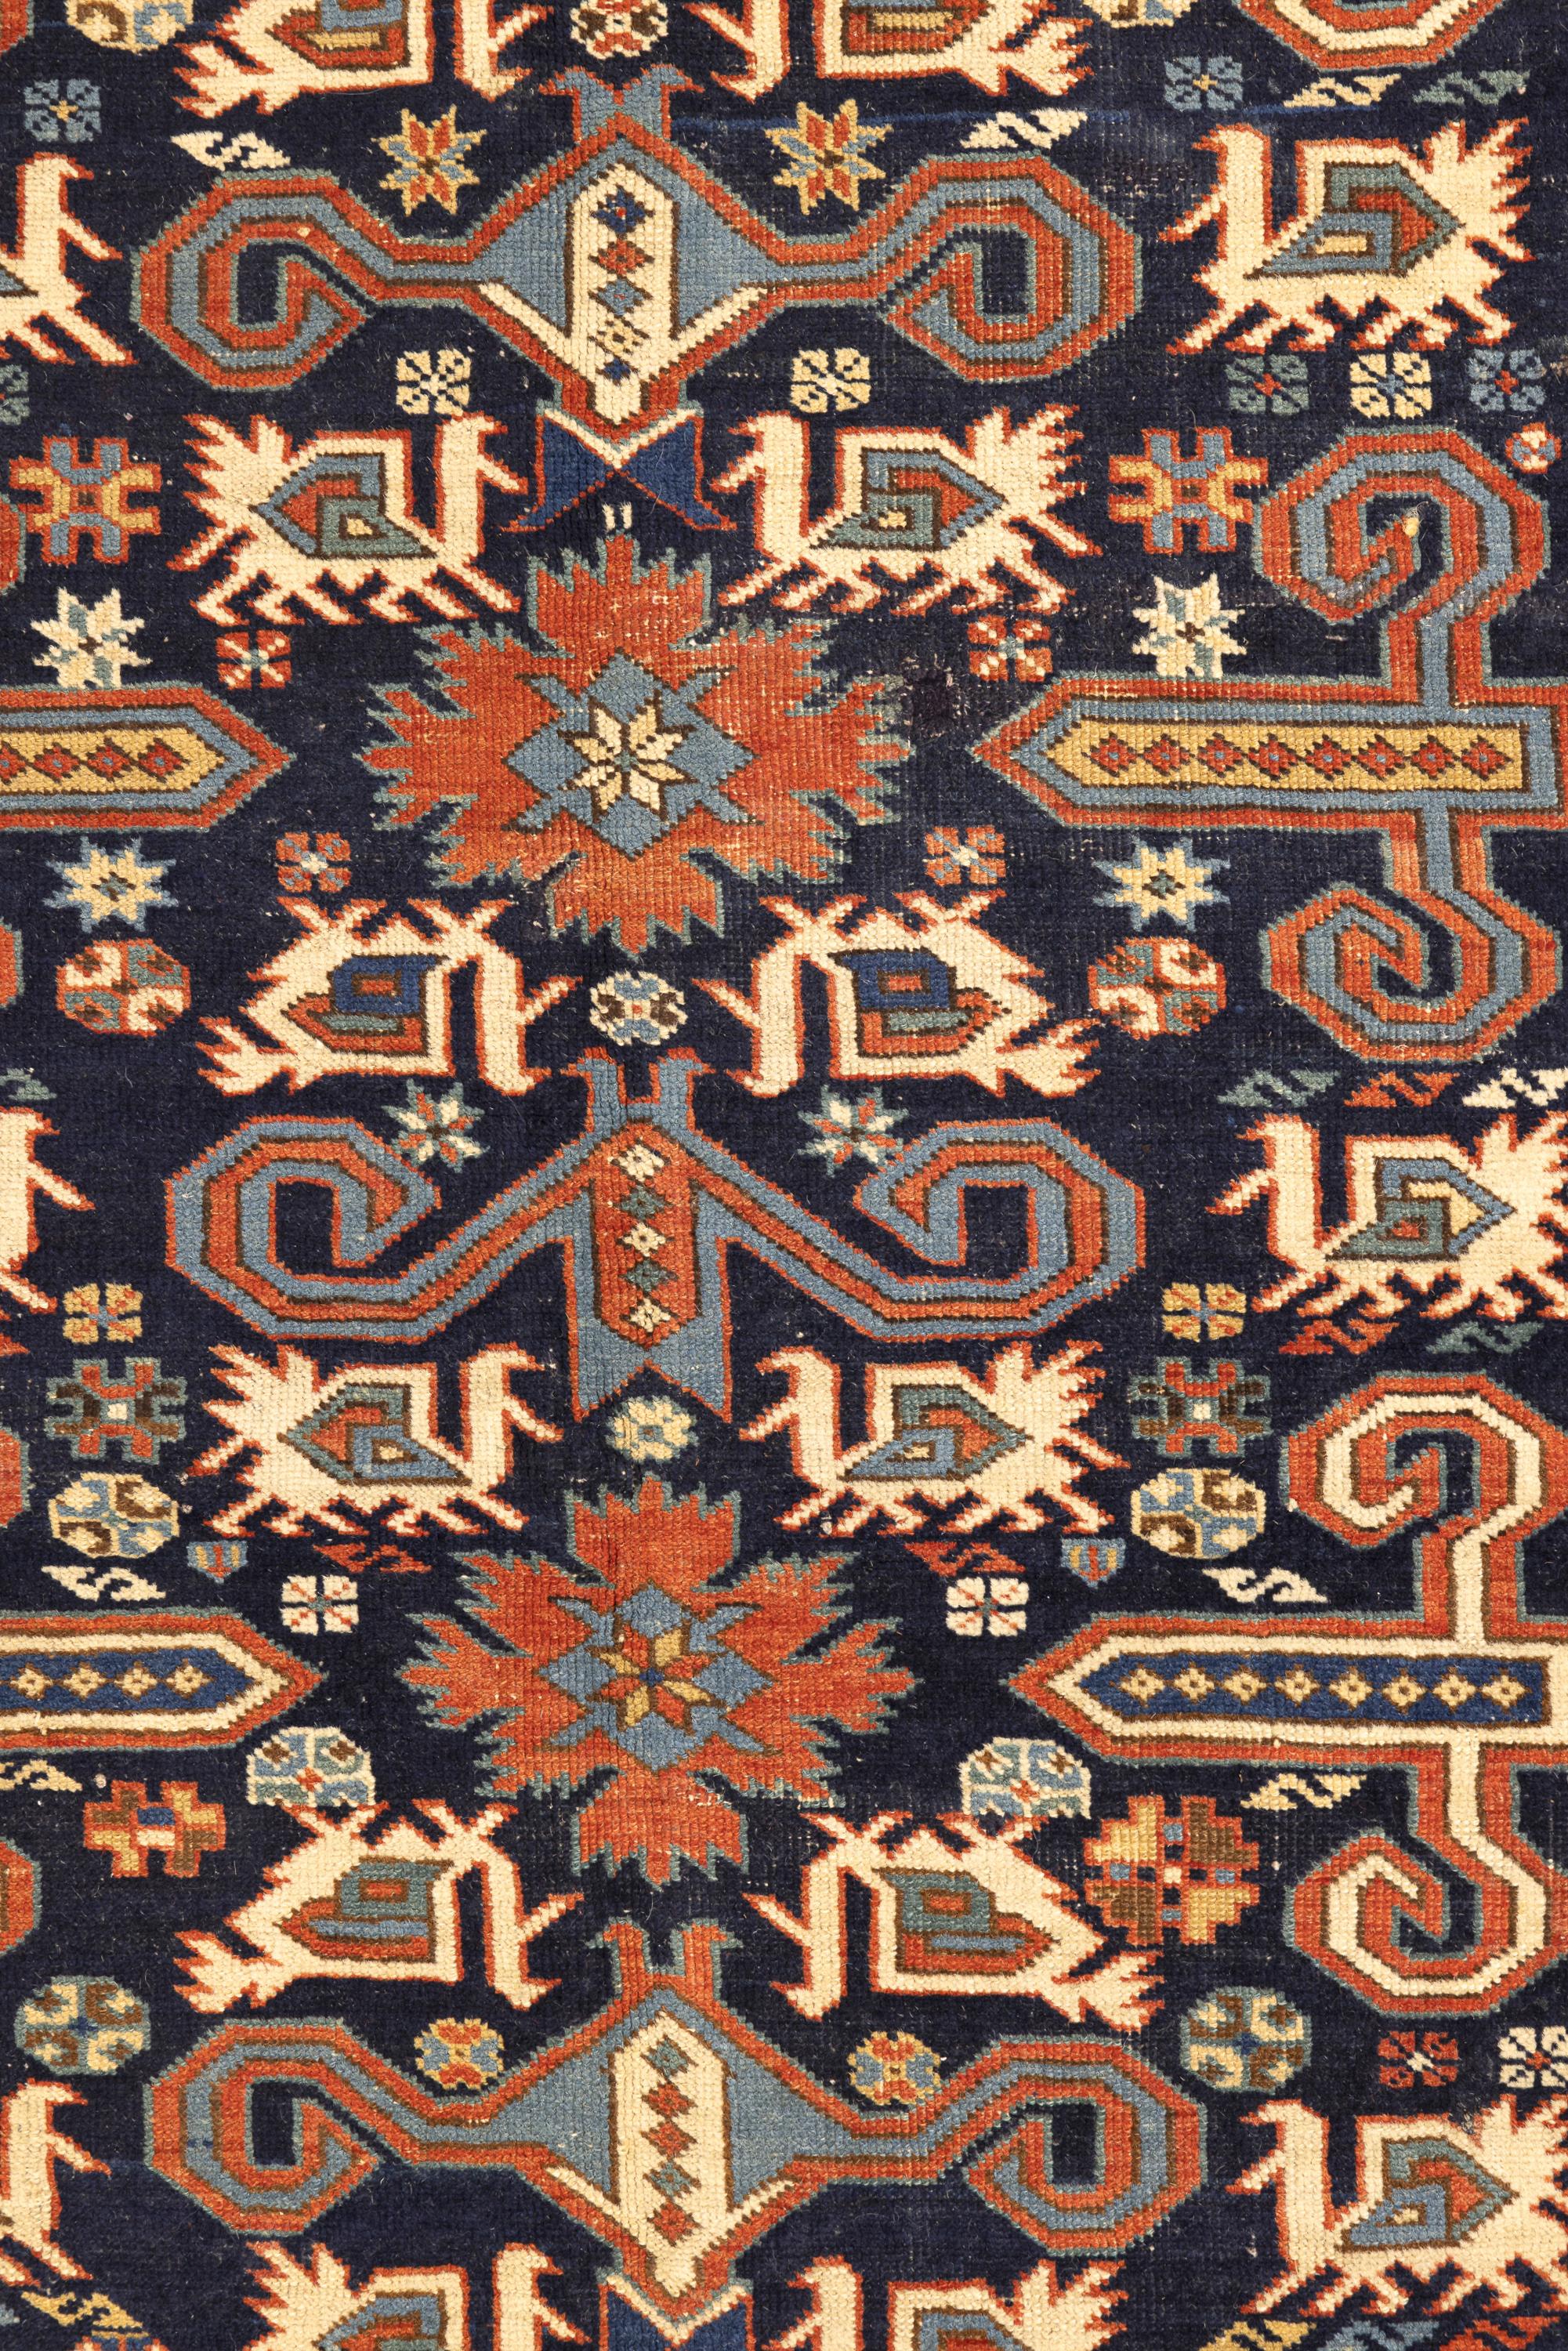 Perpedil – Kuba, Northeast Caucasus

Against a navy-blue background, this Perpedil has striking designs. Six ram’s horns (wurma) cover the central area – in blue, white and red colours. Exquisite red flowers between the horns stand out sharply and